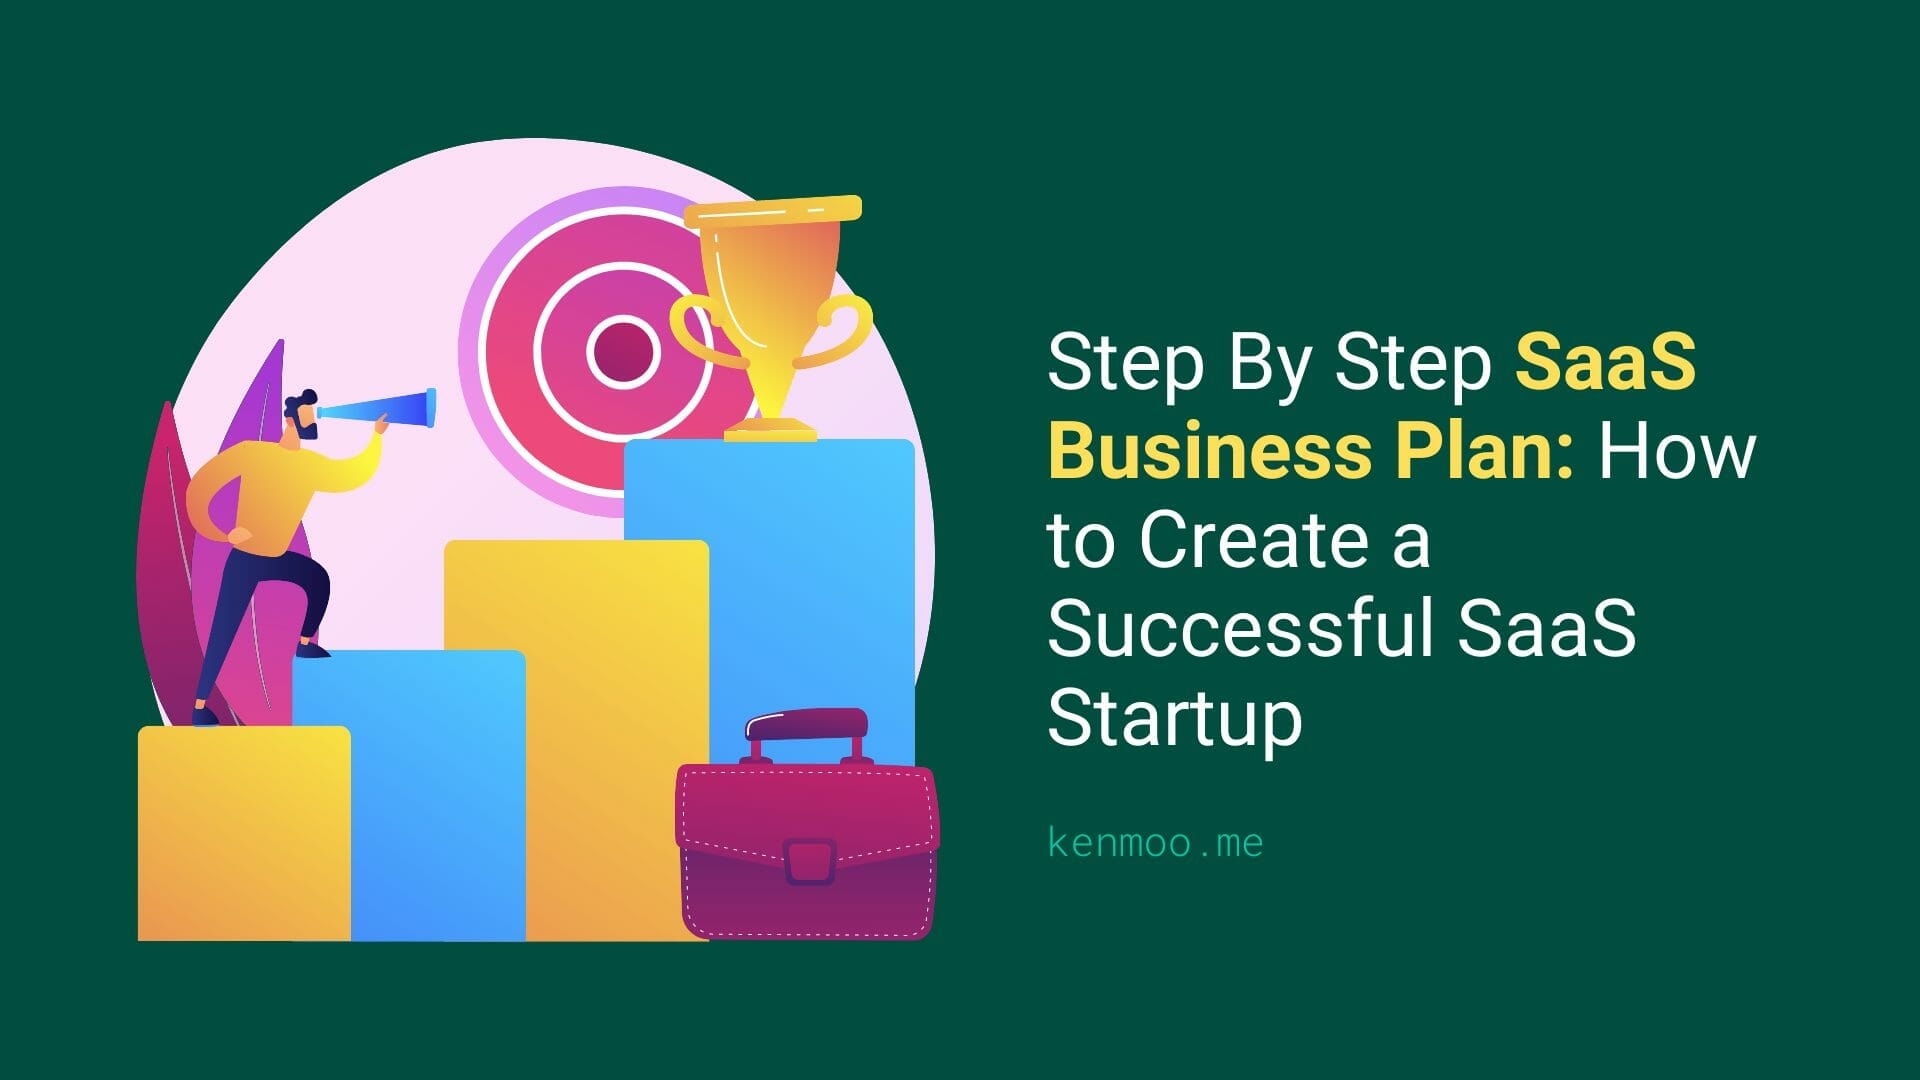 Step By Step SaaS Business Plan: How to Create a Successful SaaS Startup